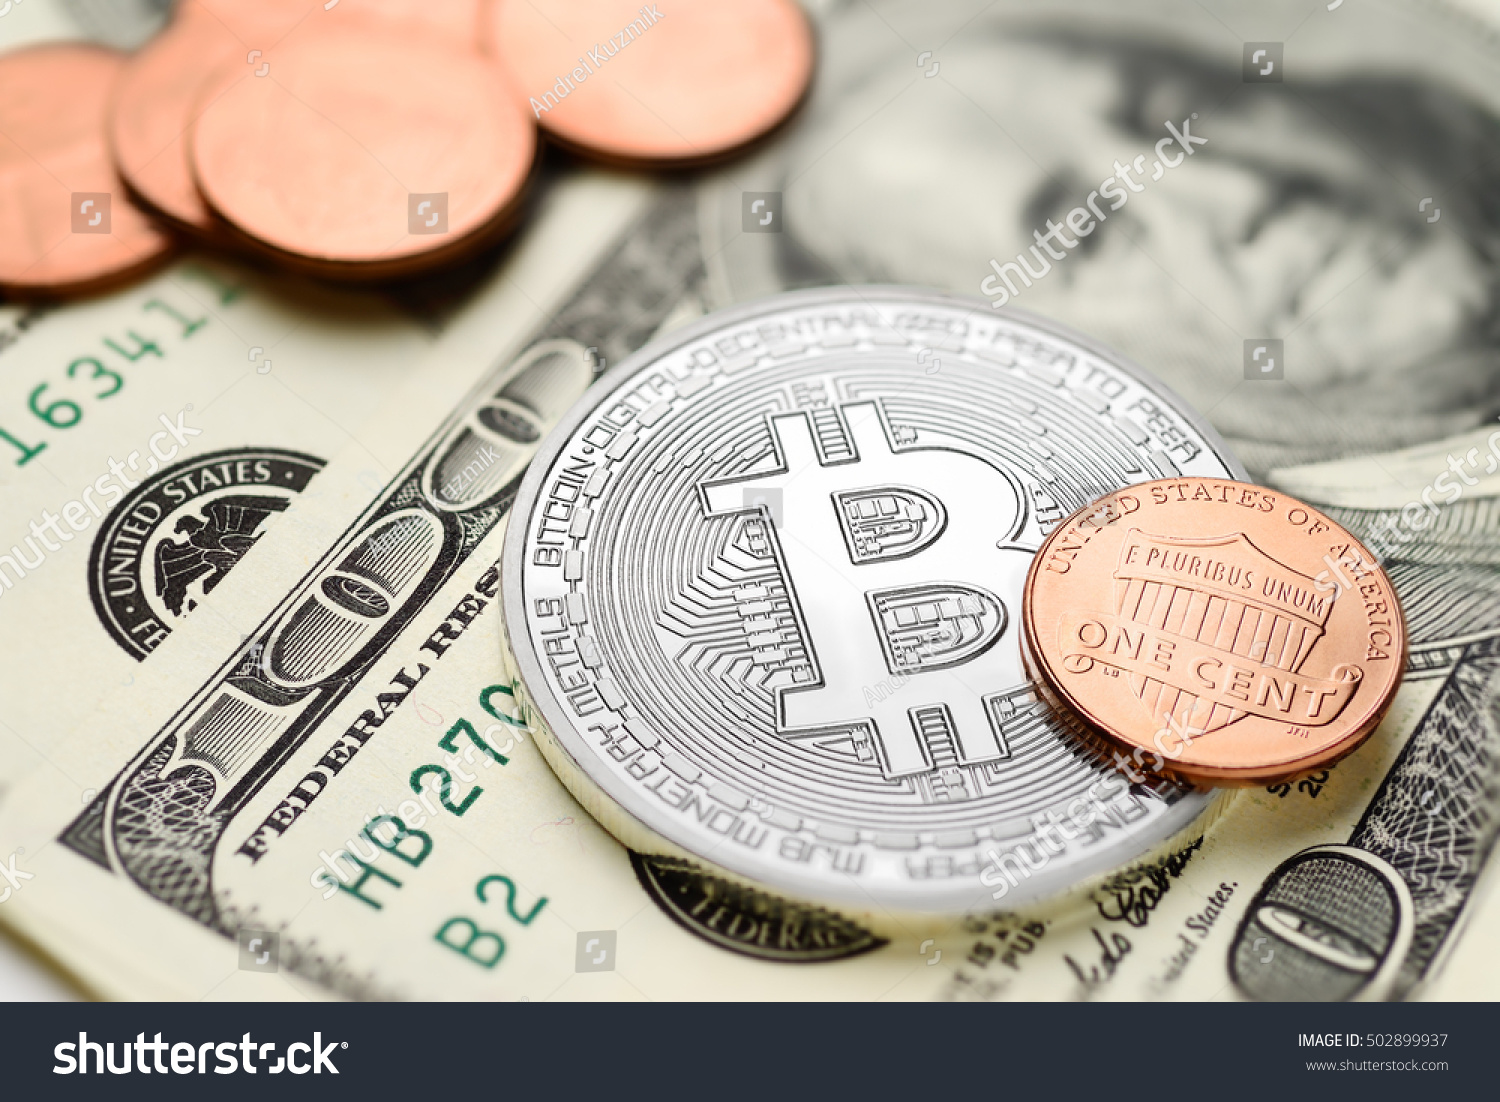 Bitcoin One Cent Coins On Us Stock Photo 502899937 ...